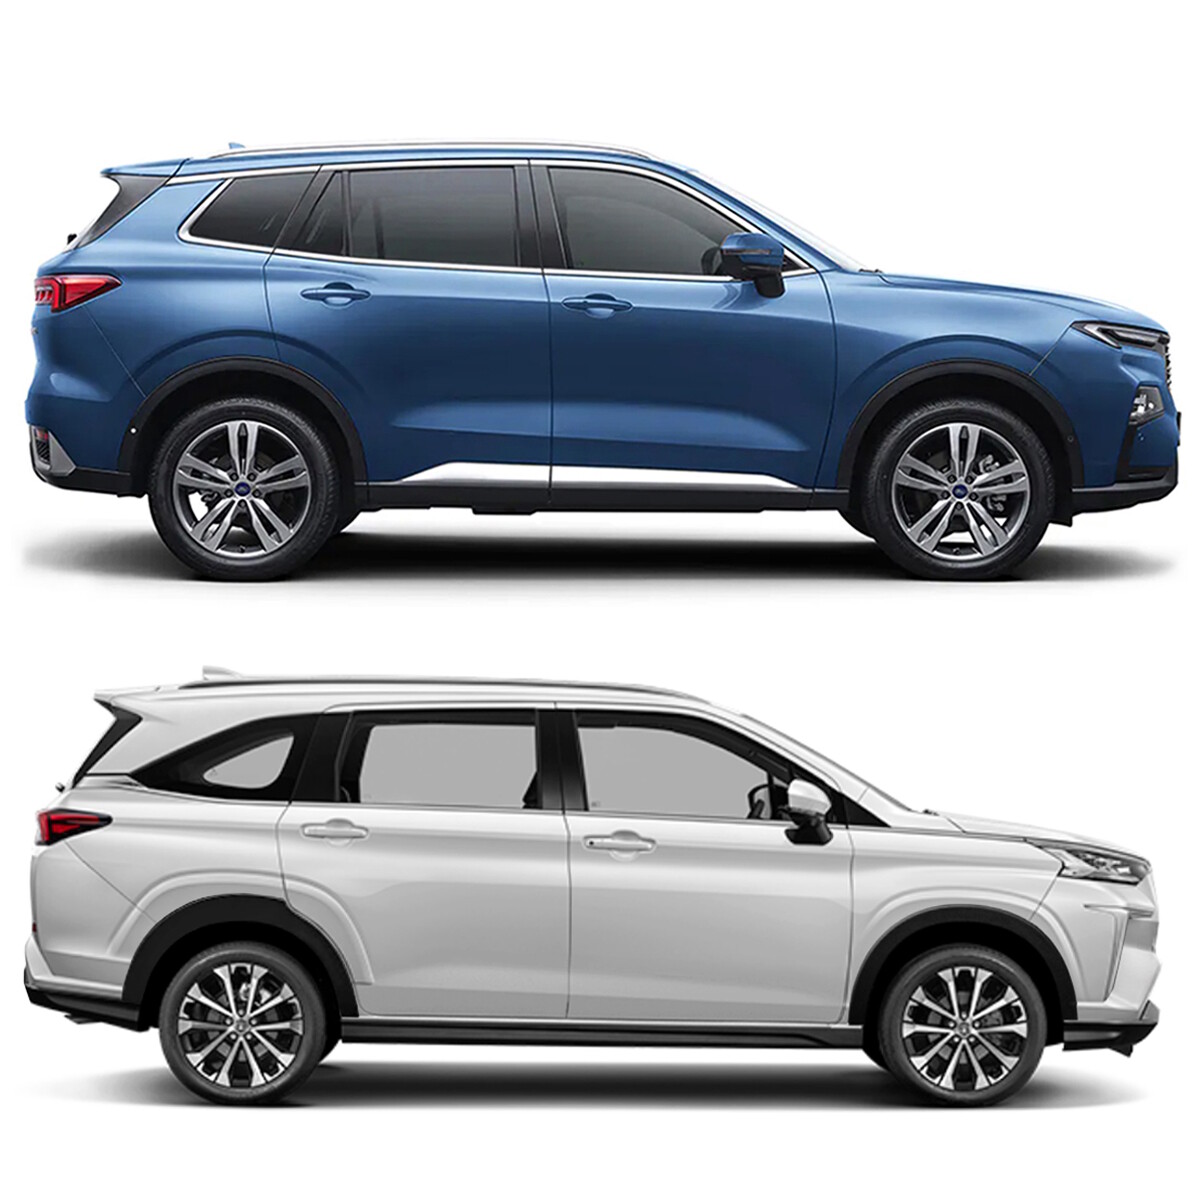 How big is the new Ford Equator Sport compared with the Ford Territory